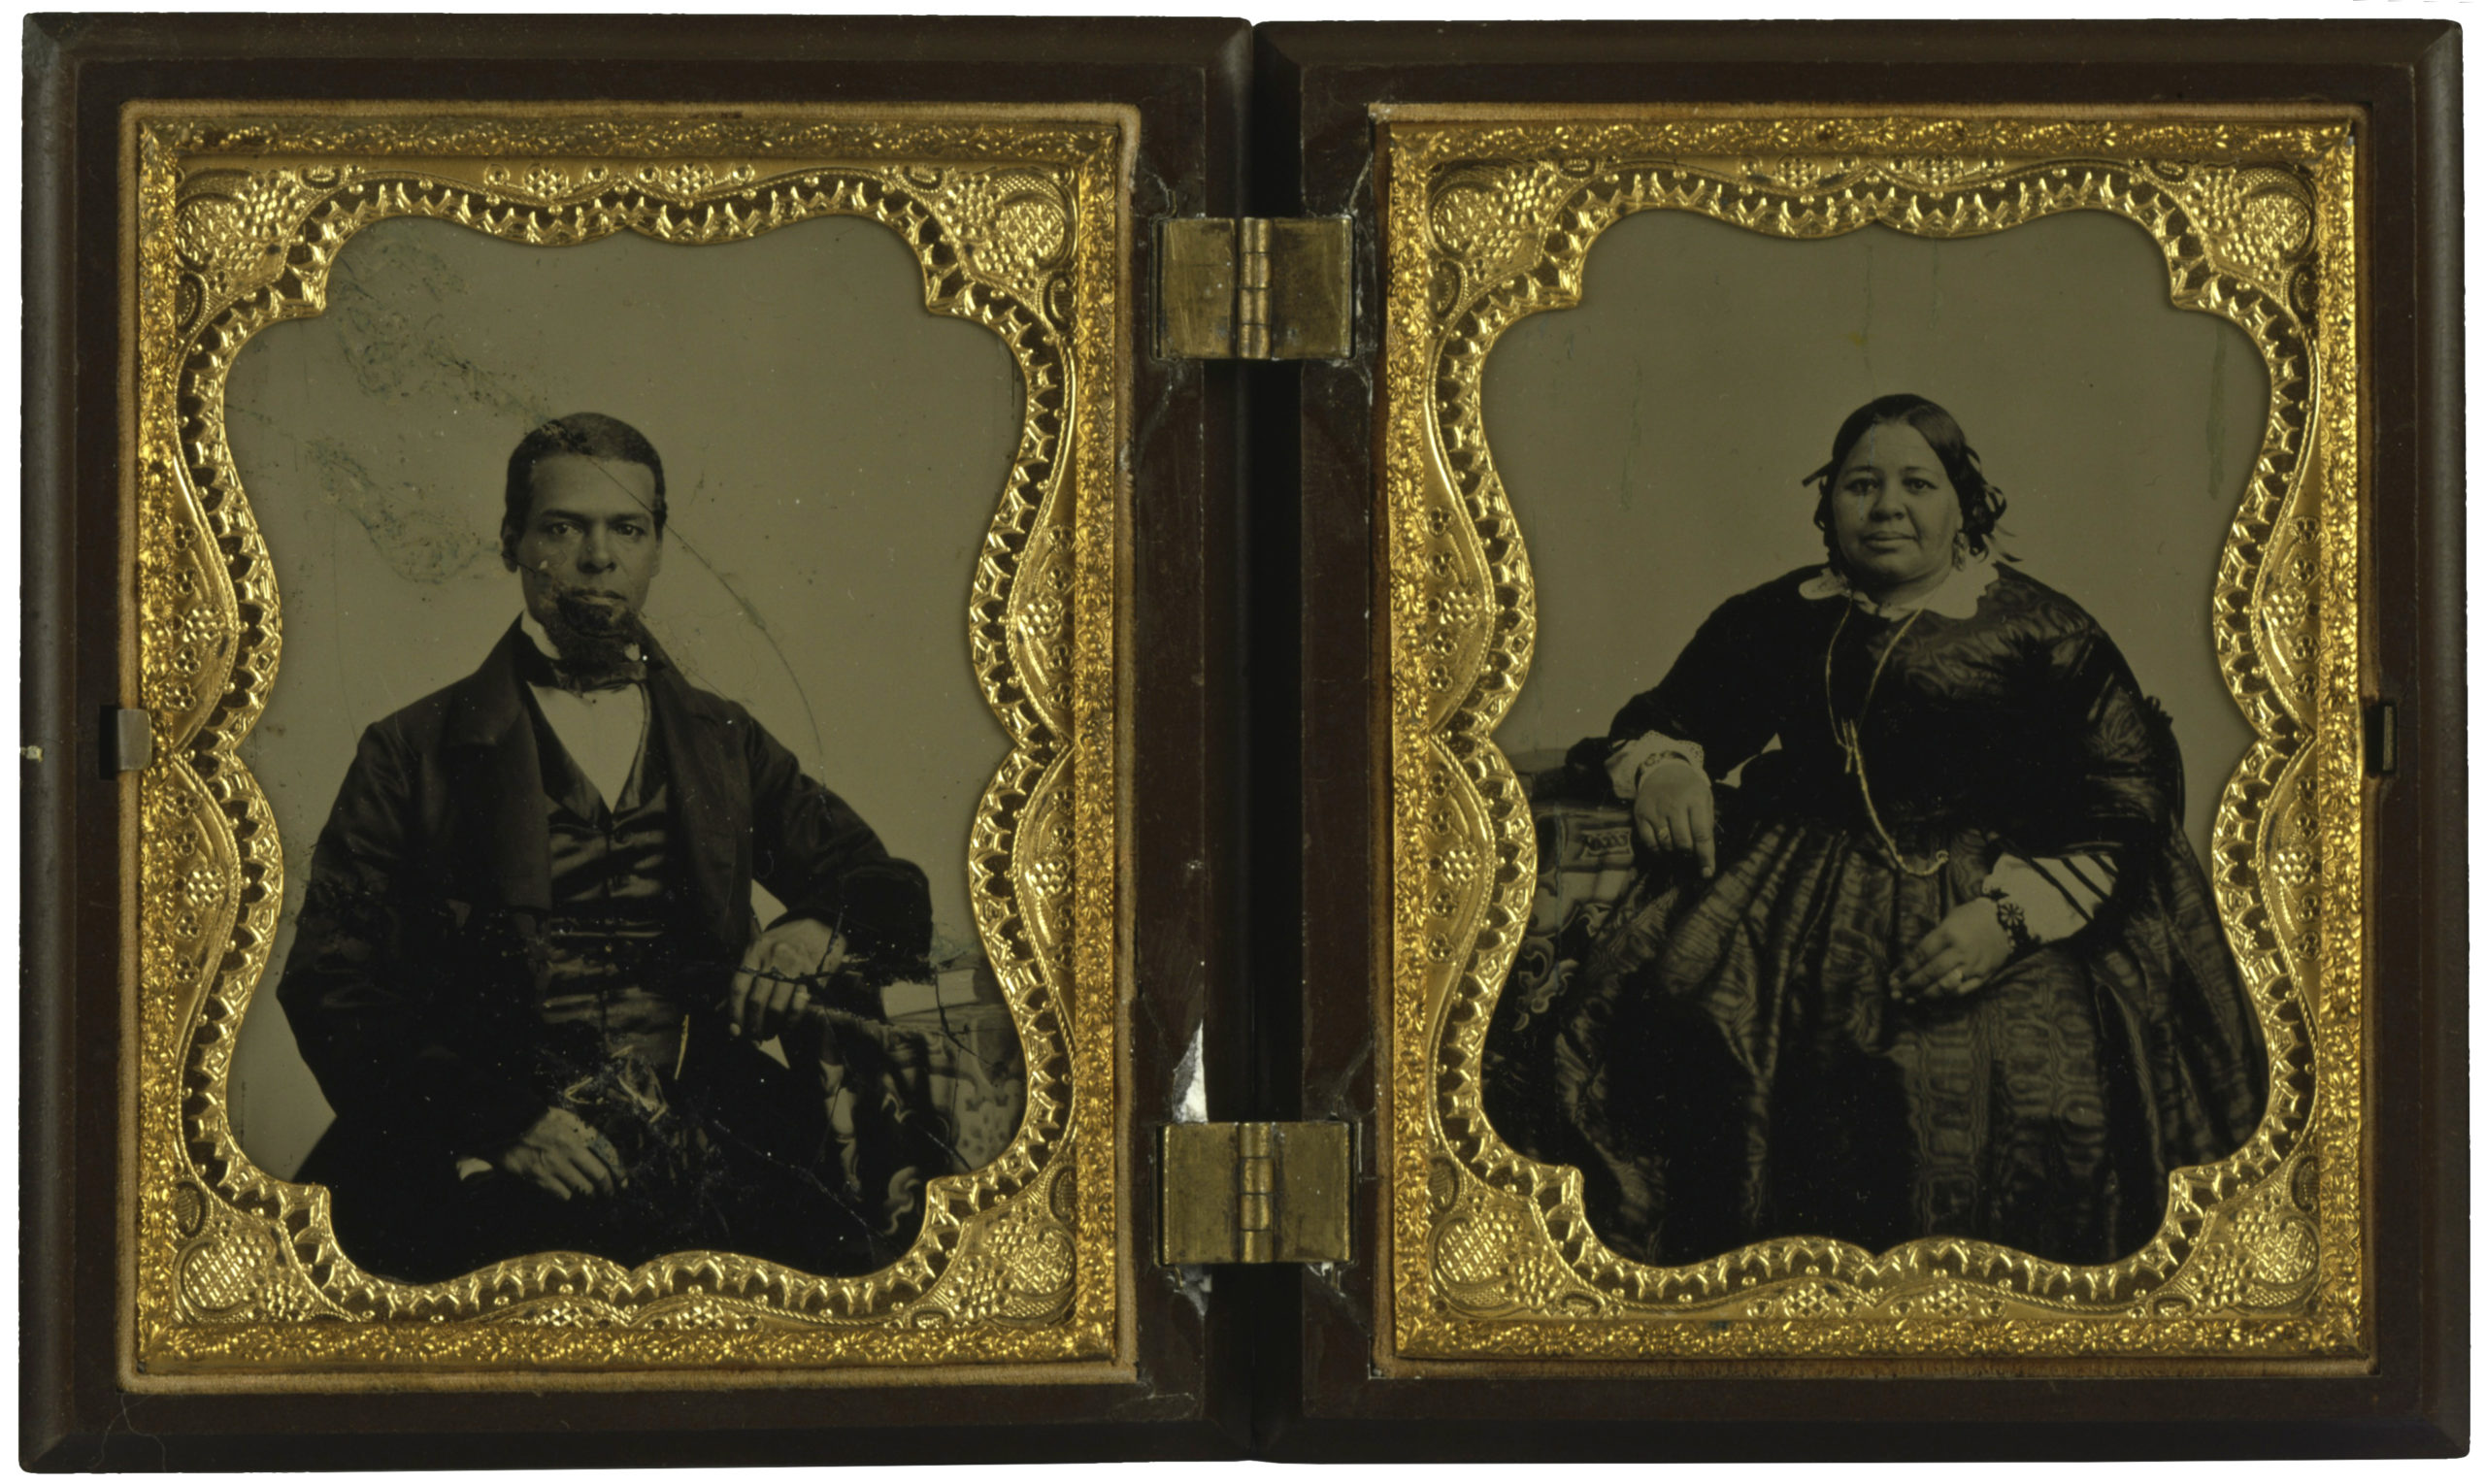 Albro Lyons, Sr. and Mary Joseph Lyons, c. 1860, ambrotype (Schomburg Center for Research in Black Culture, New York Public Library)